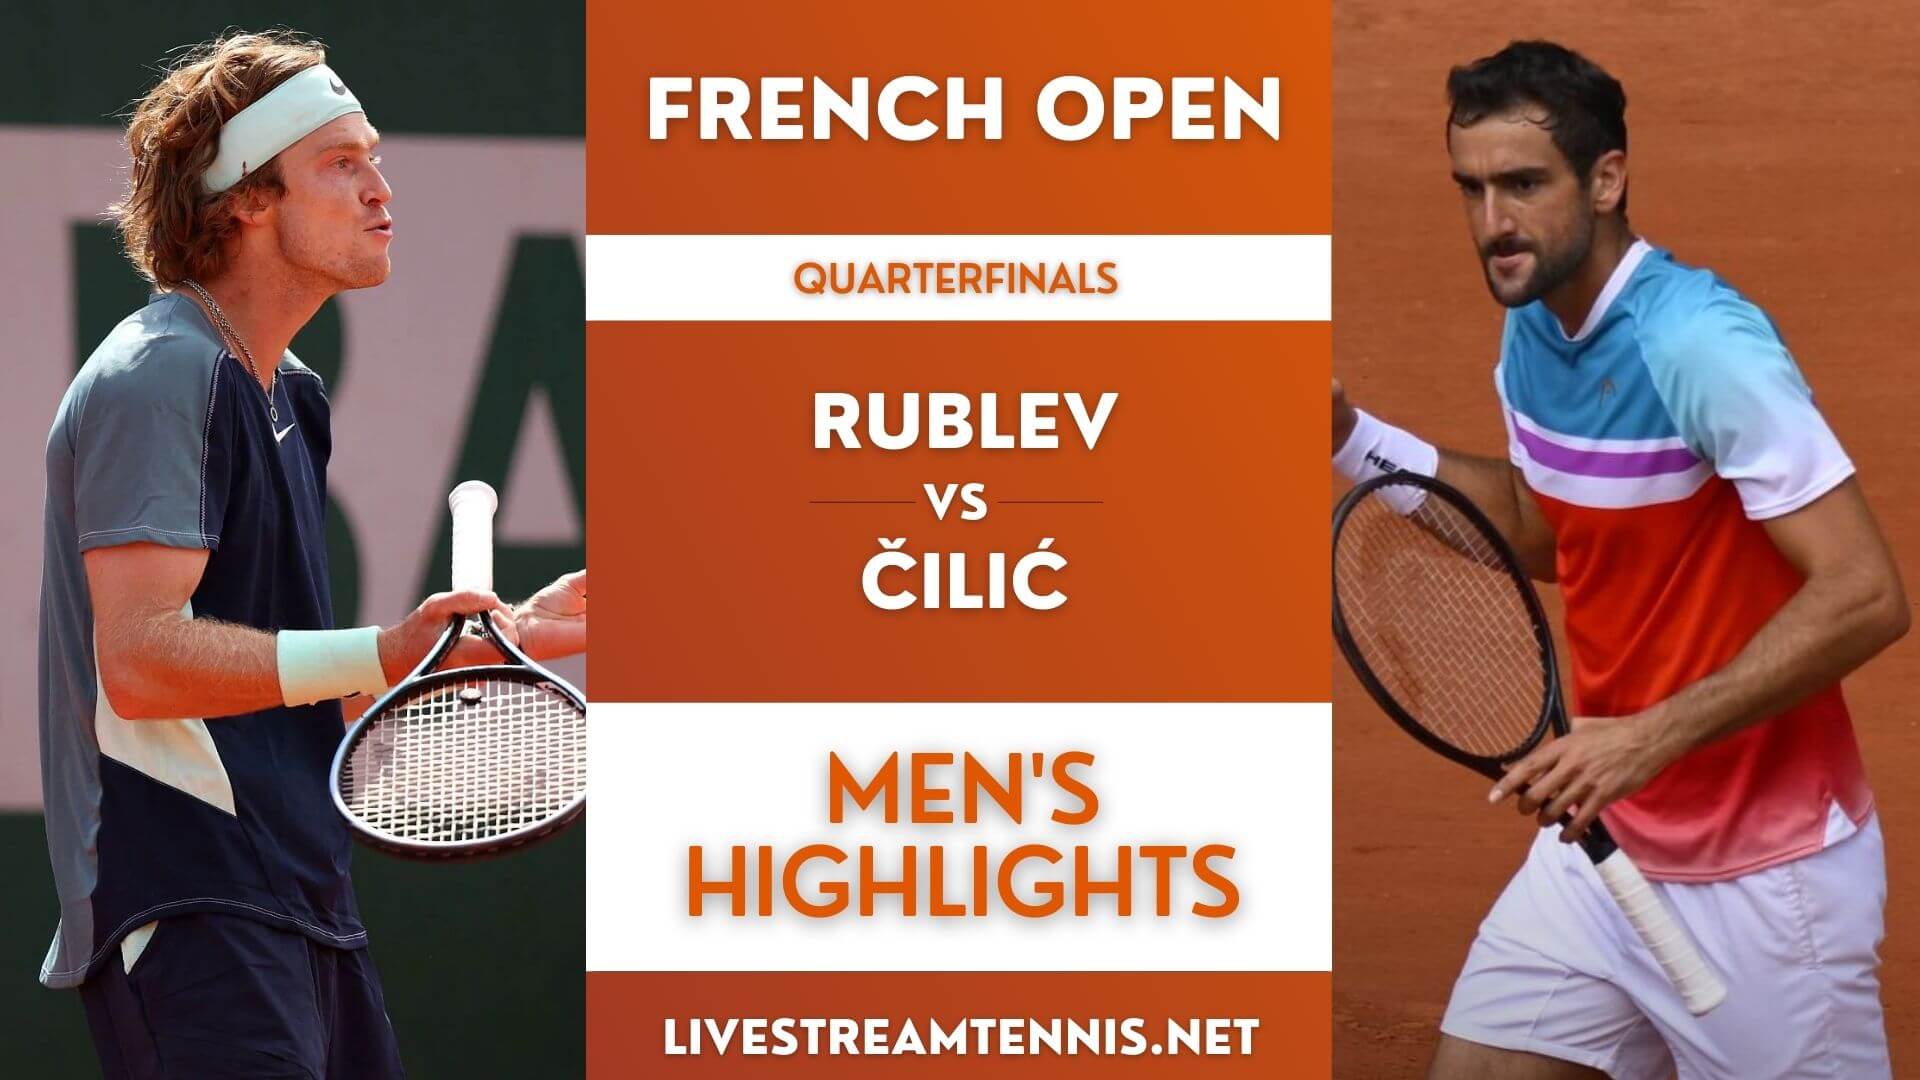 French Open Gents Quarterfinal 4 Highlights 2022